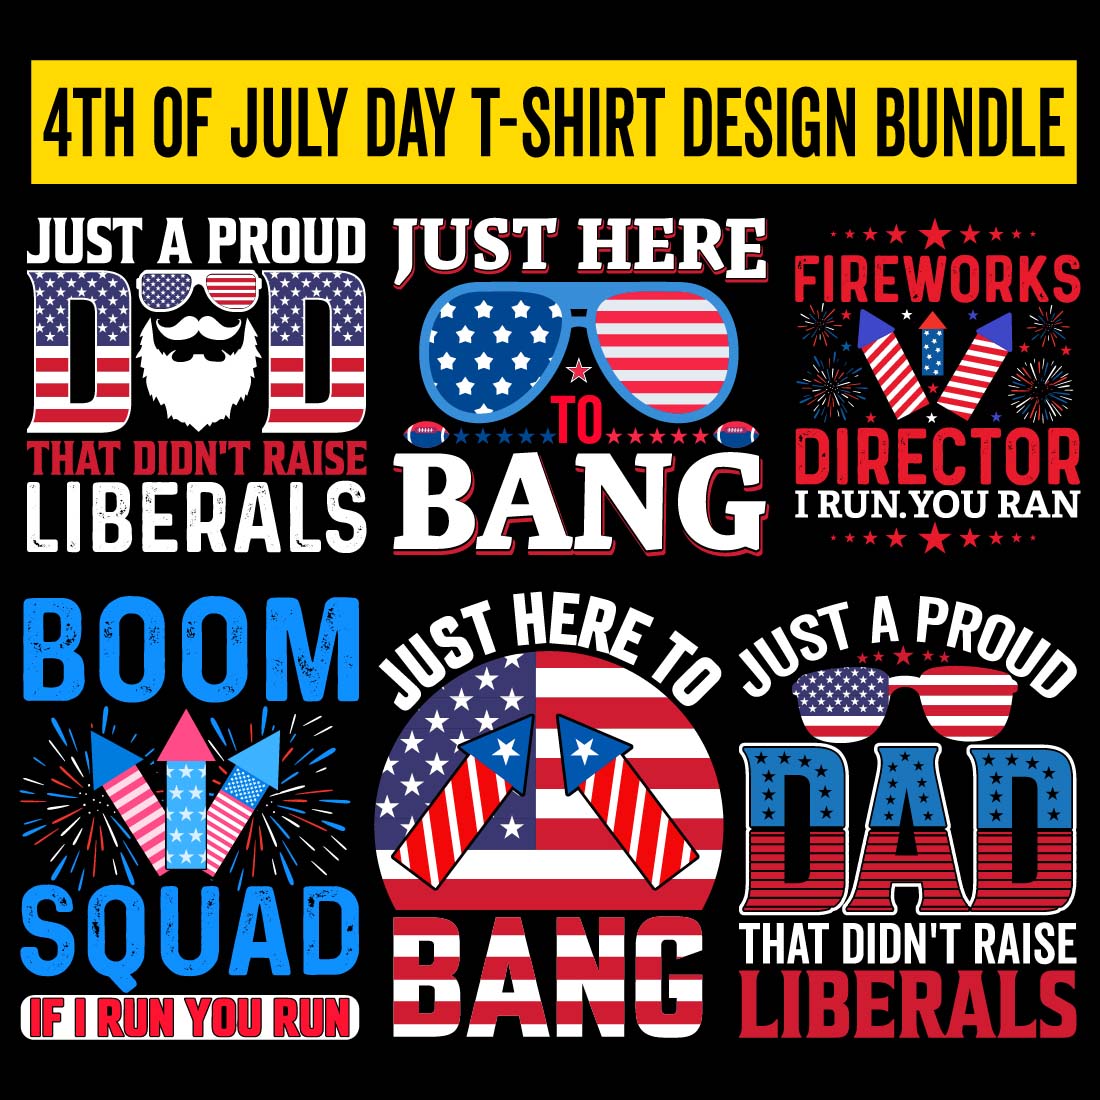 4th of July Best selling t shirt design bundle preview image.